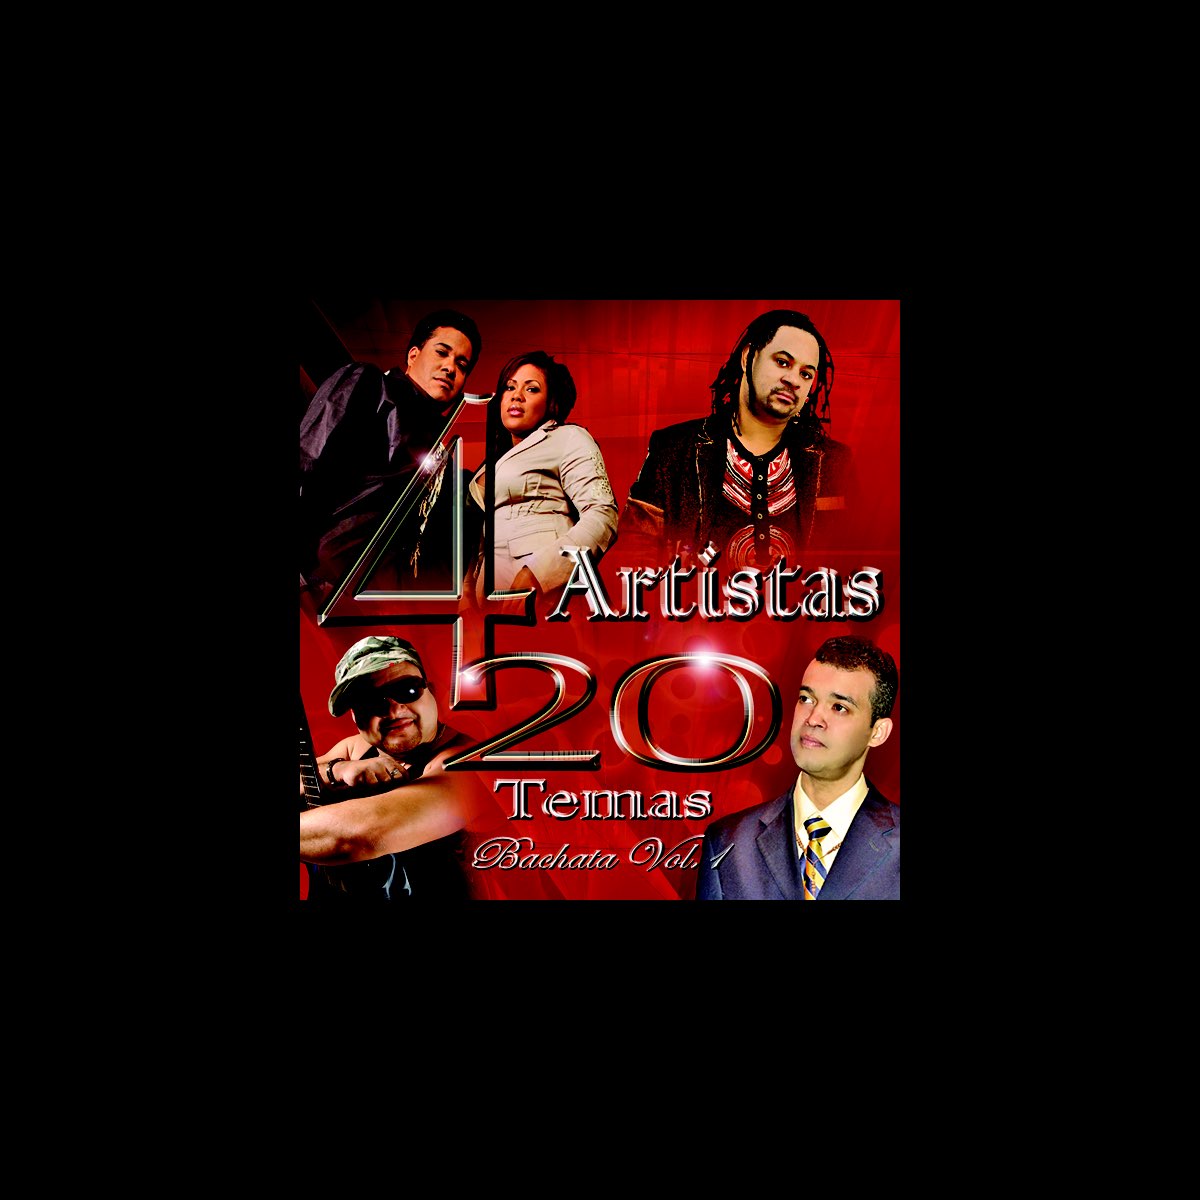 20/4 Bachata, Vol. 1 by Various Artists on Apple Music